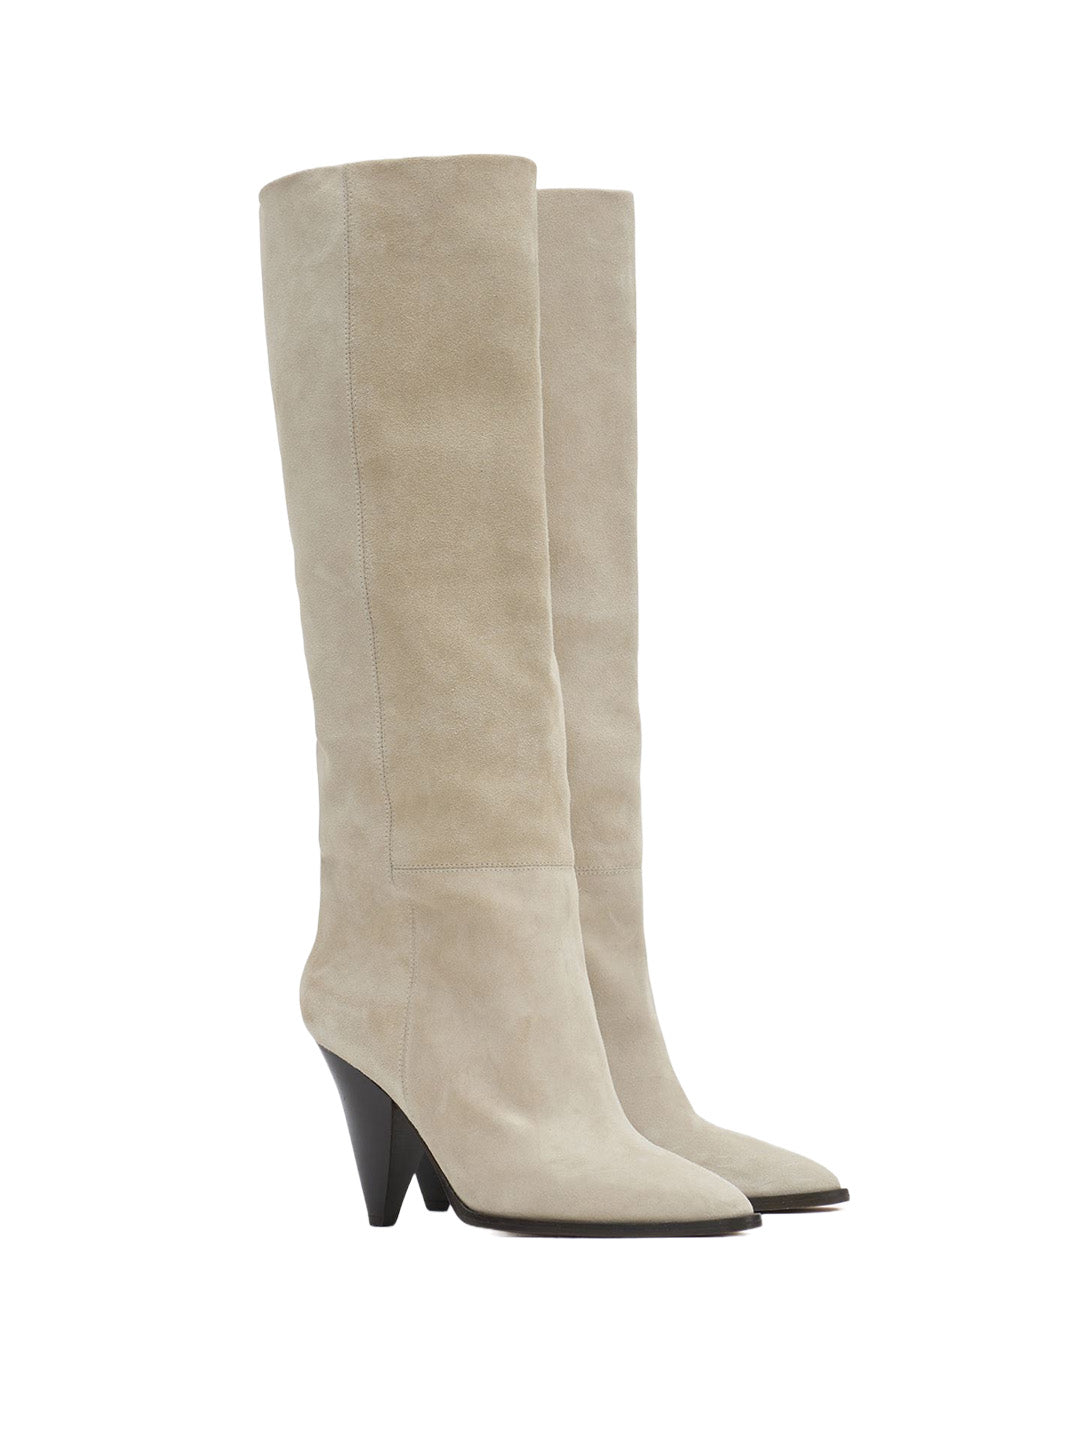 Ririo Suede Leather Boots in Beige